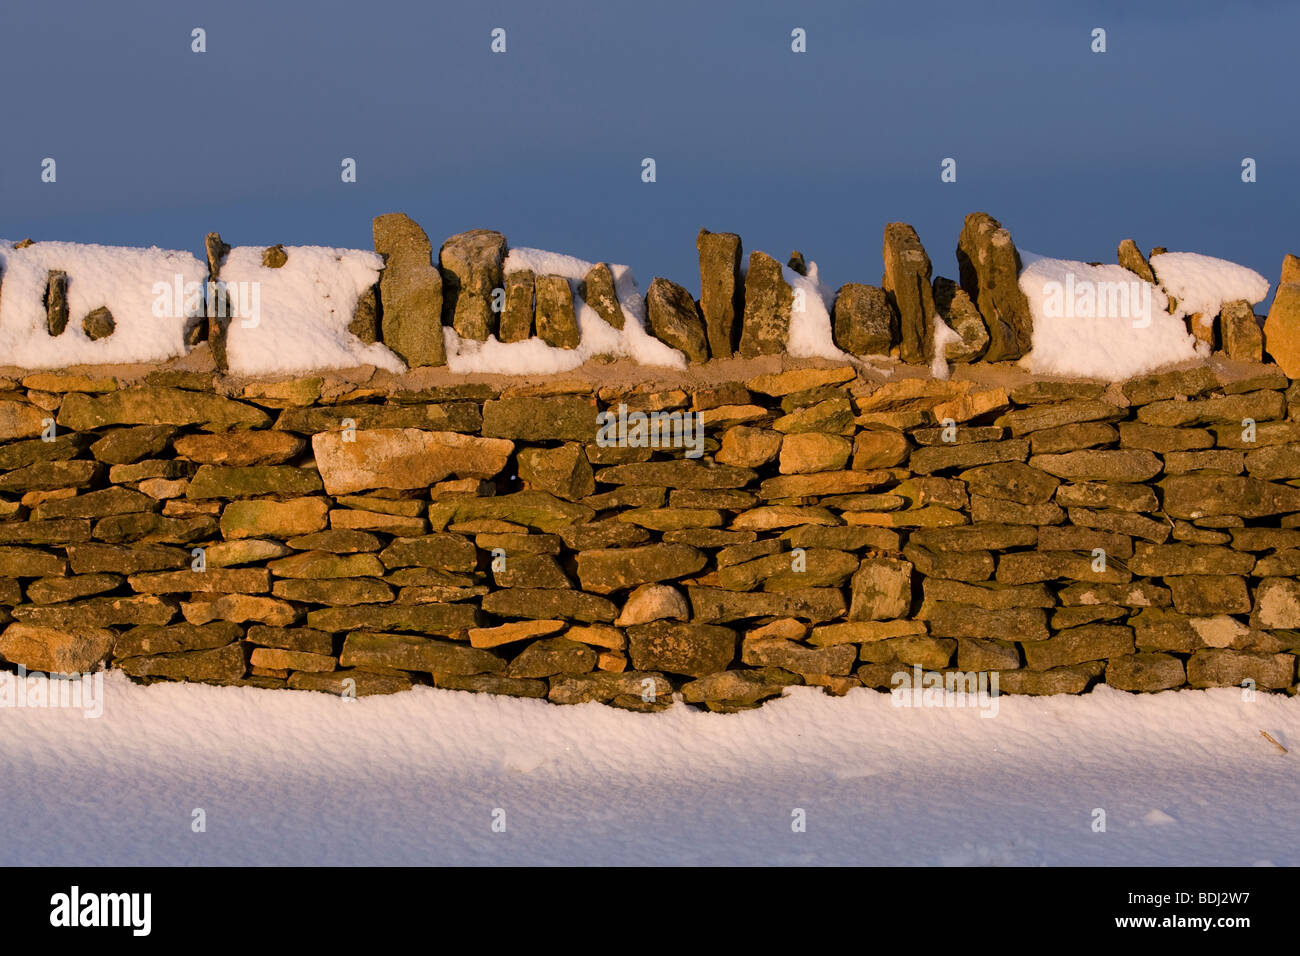 Dry stone wall under a blanket of snow in the Cotswolds, England. Photo taken at sunrise in February 2009 Stock Photo